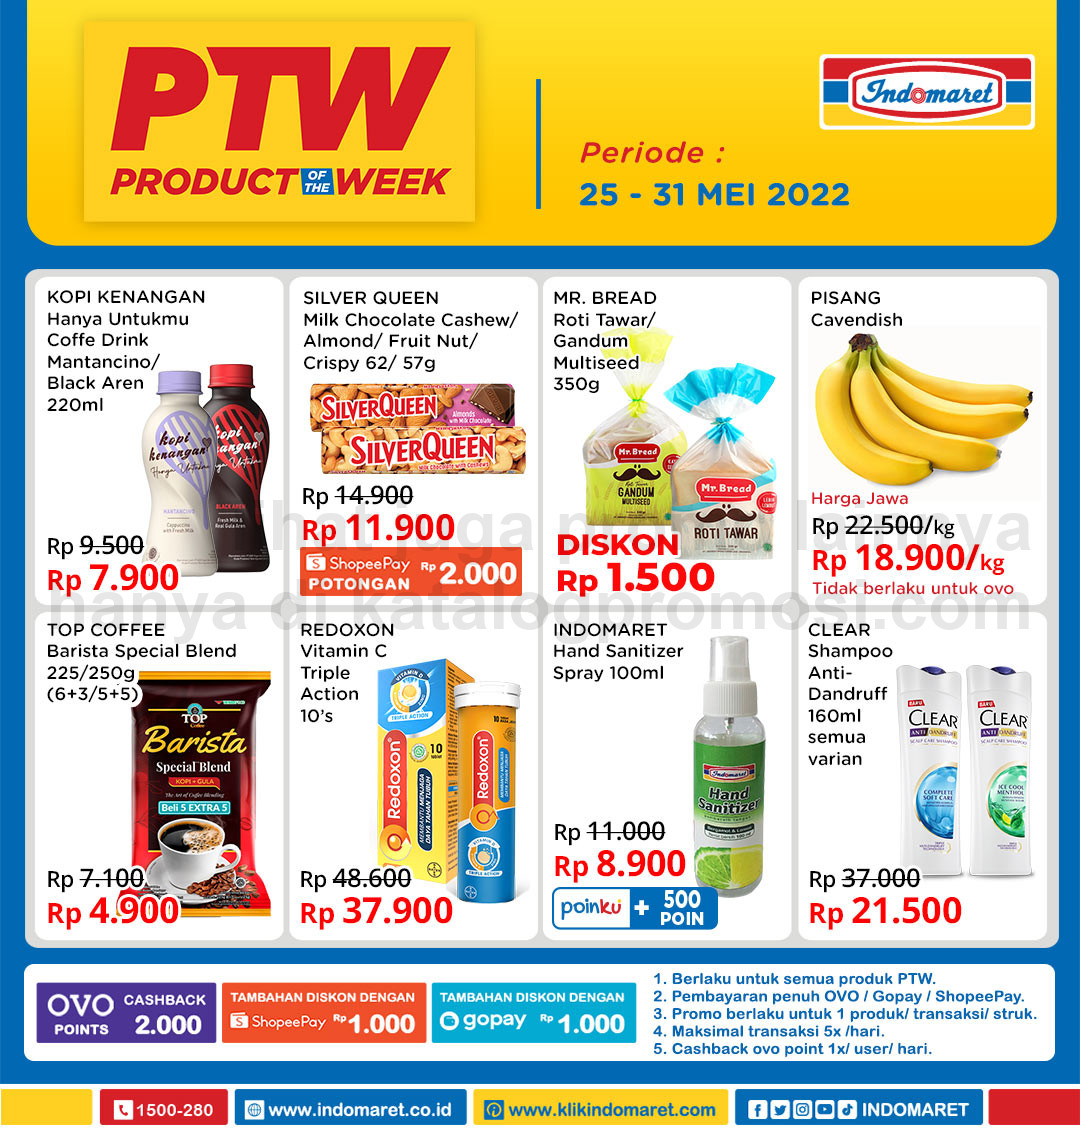 INDOMARET Promo PTW - PRODUCT of The Week periode 25-31 Mei 2022